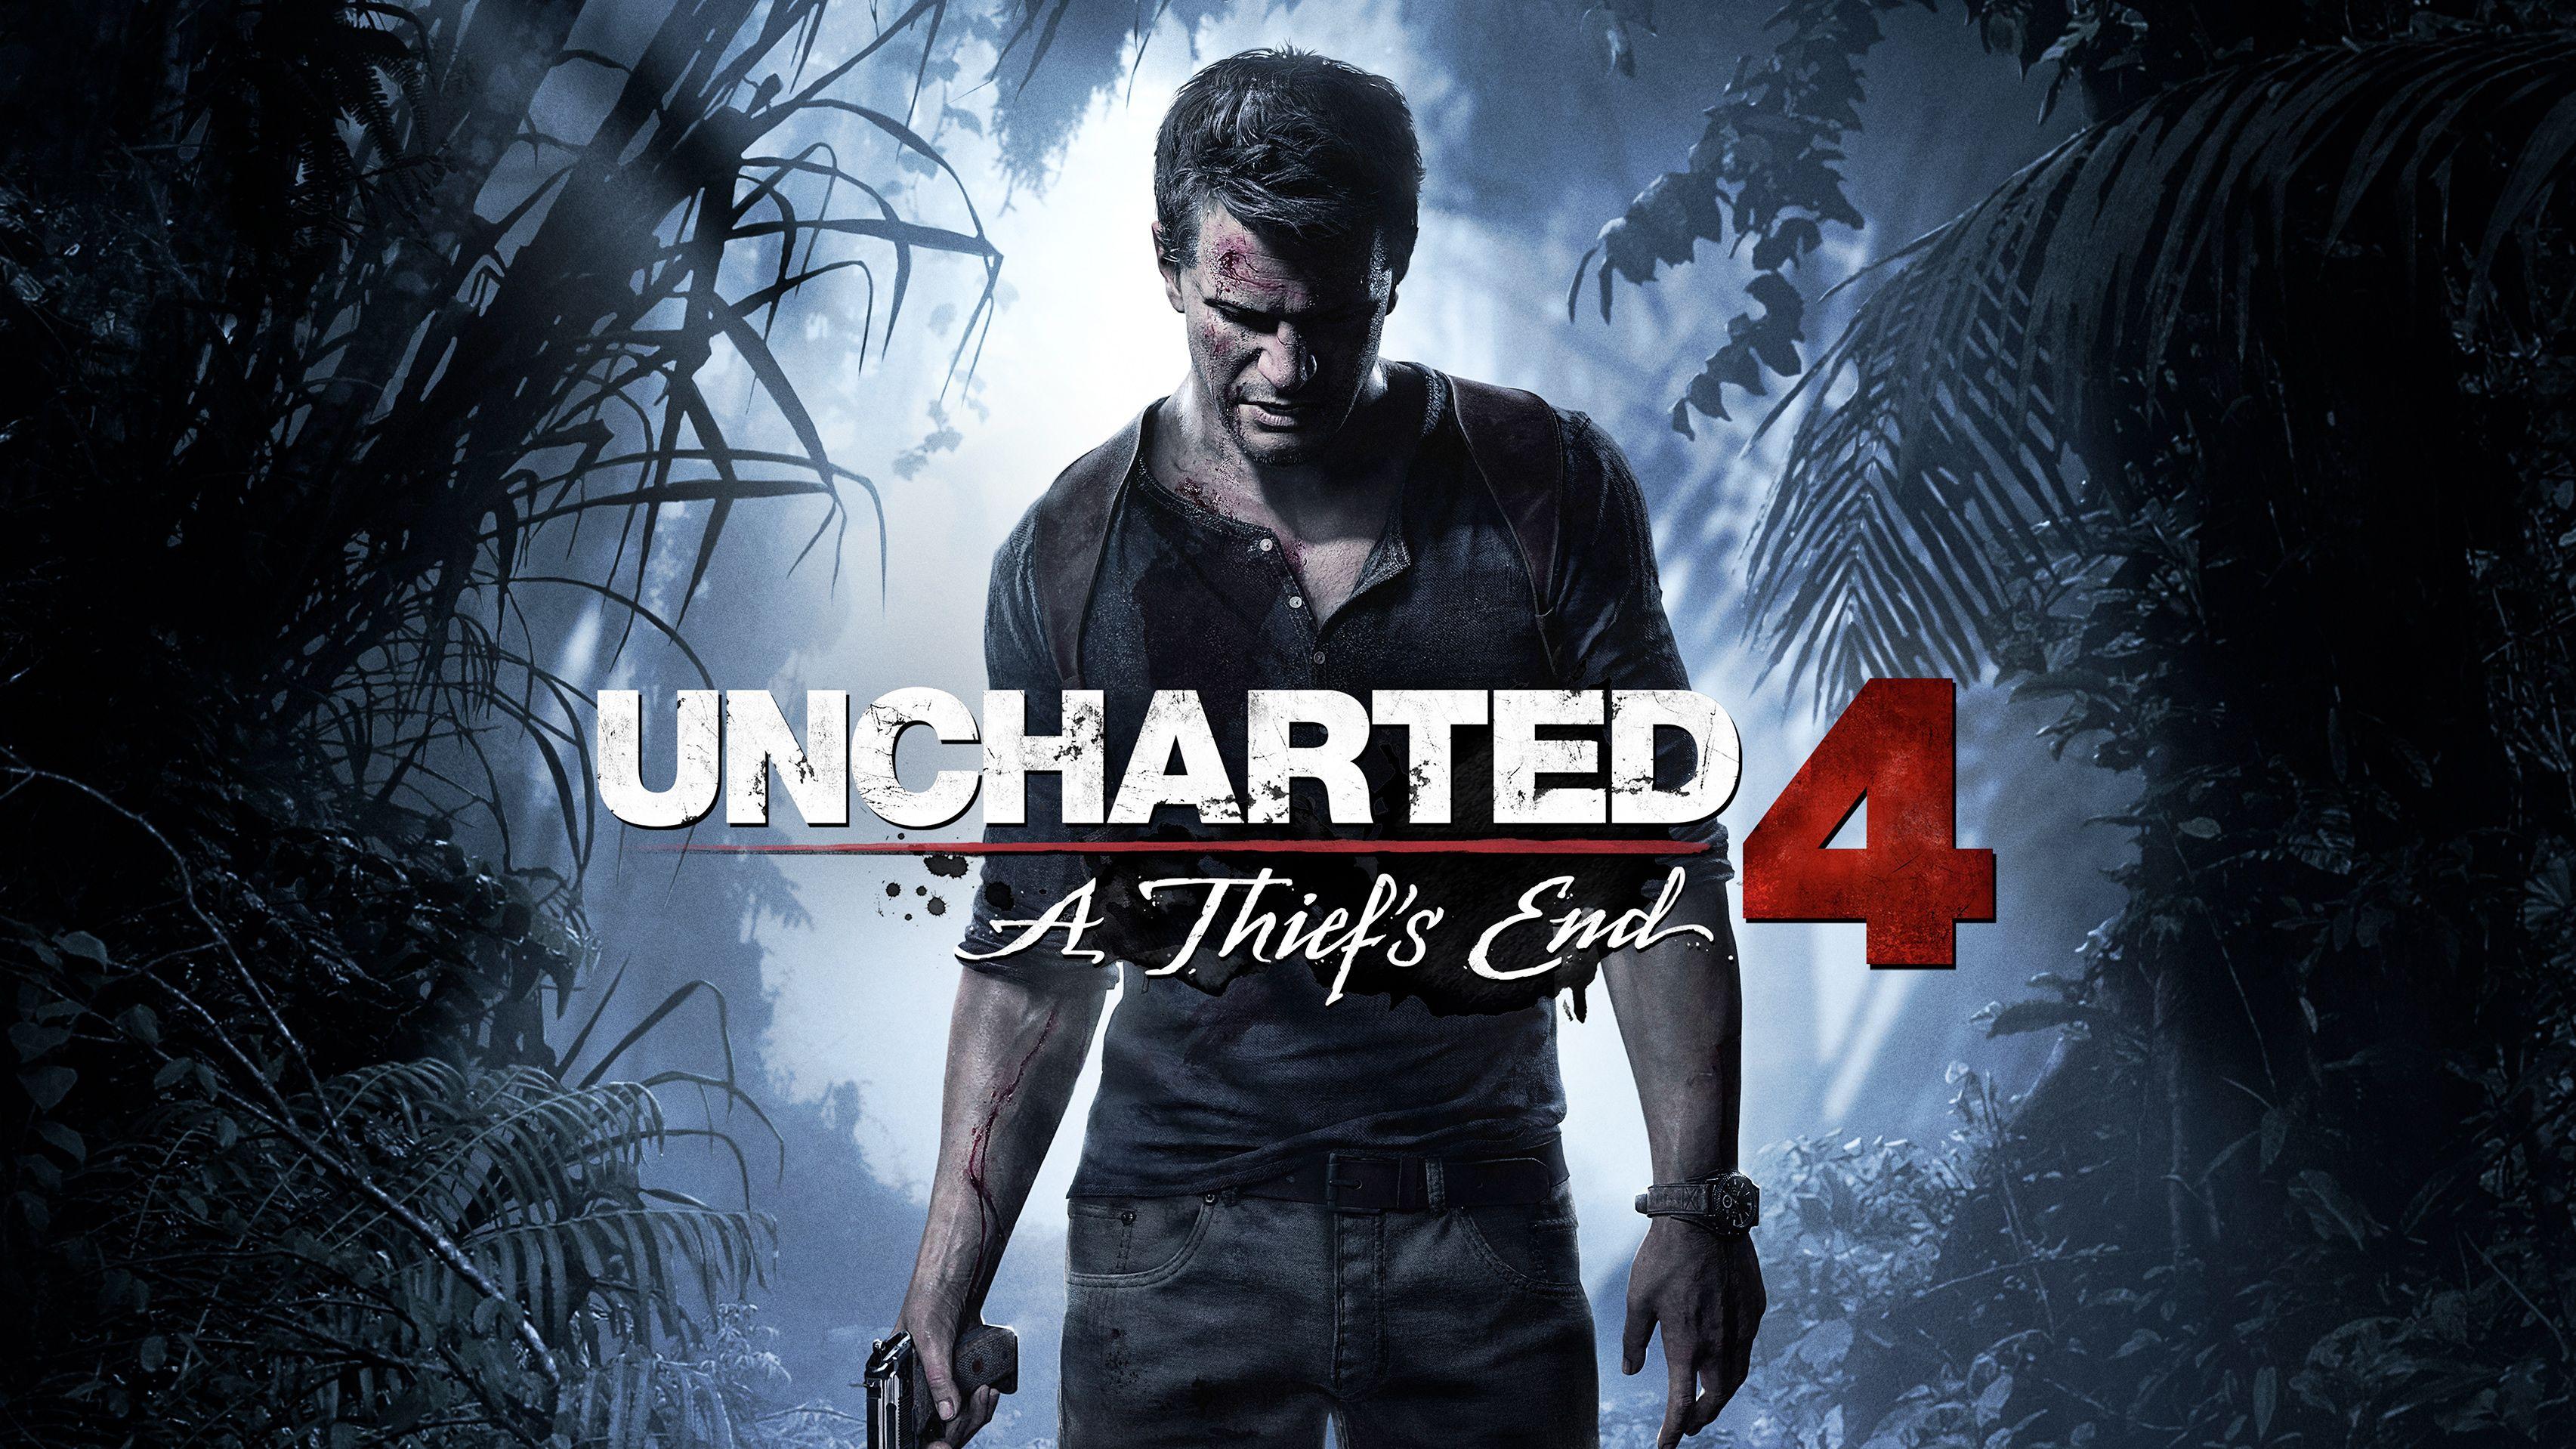 Download 5 Uncharted 4: A Thief's End Wallpaper